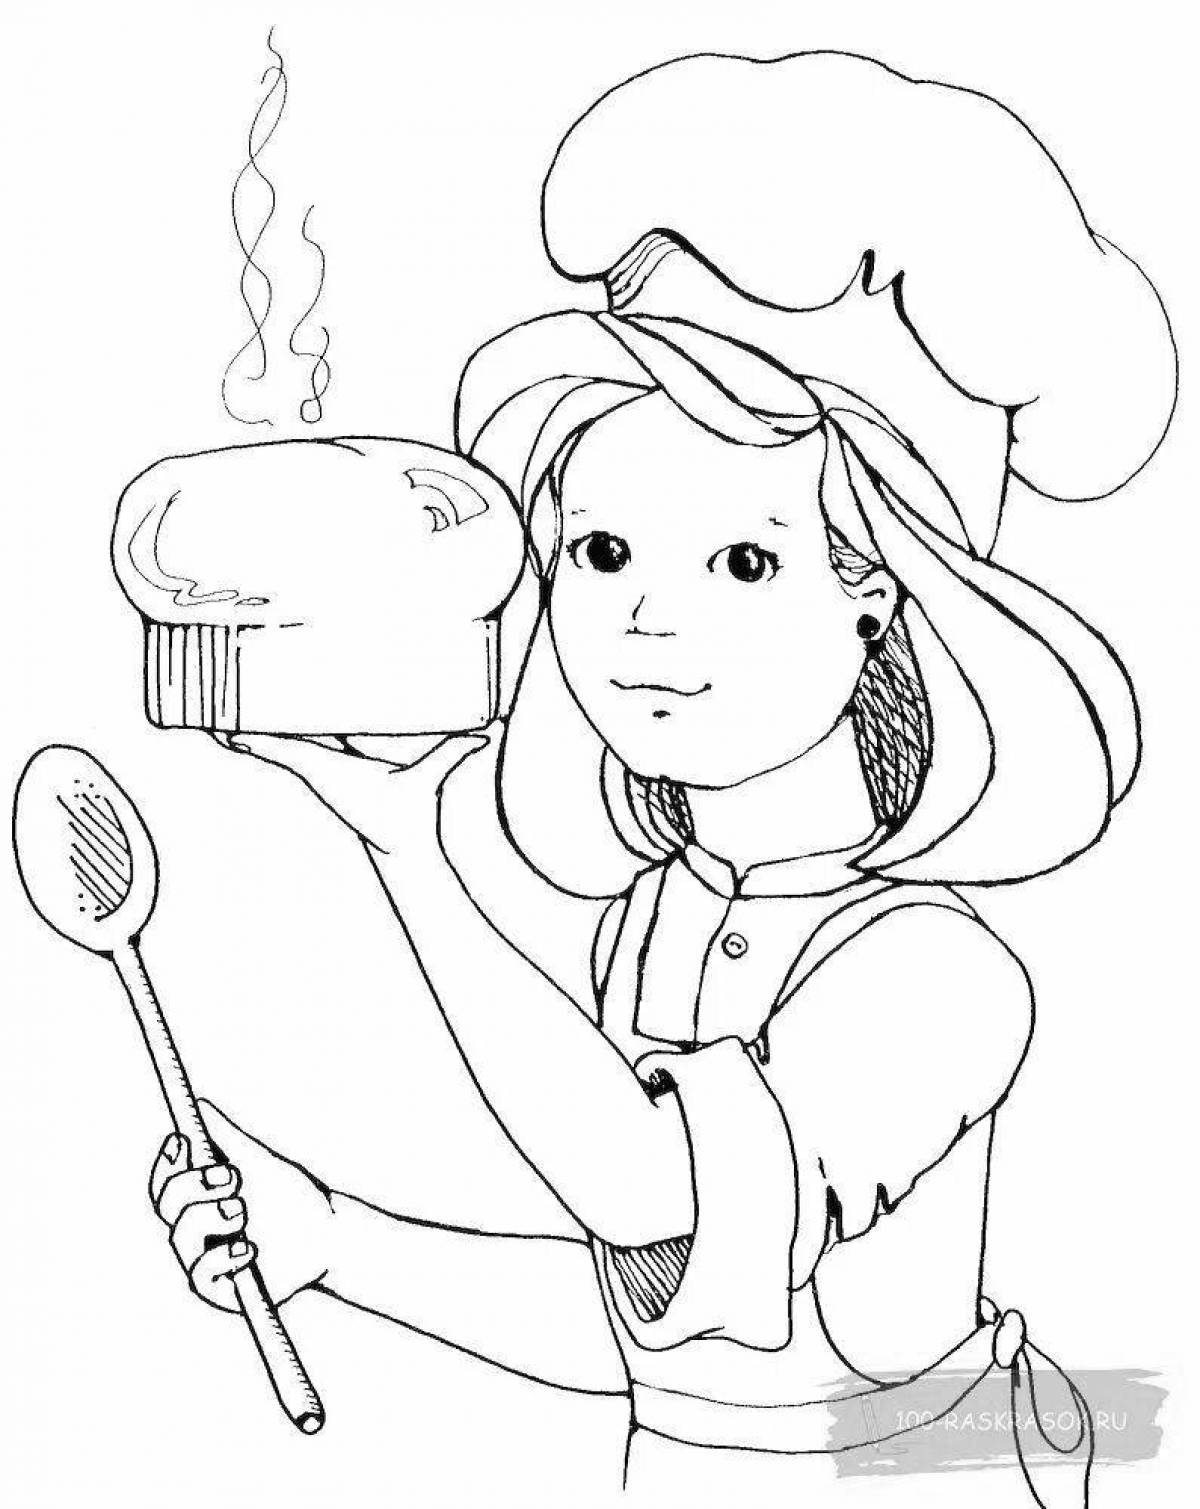 Exciting cook profession coloring book